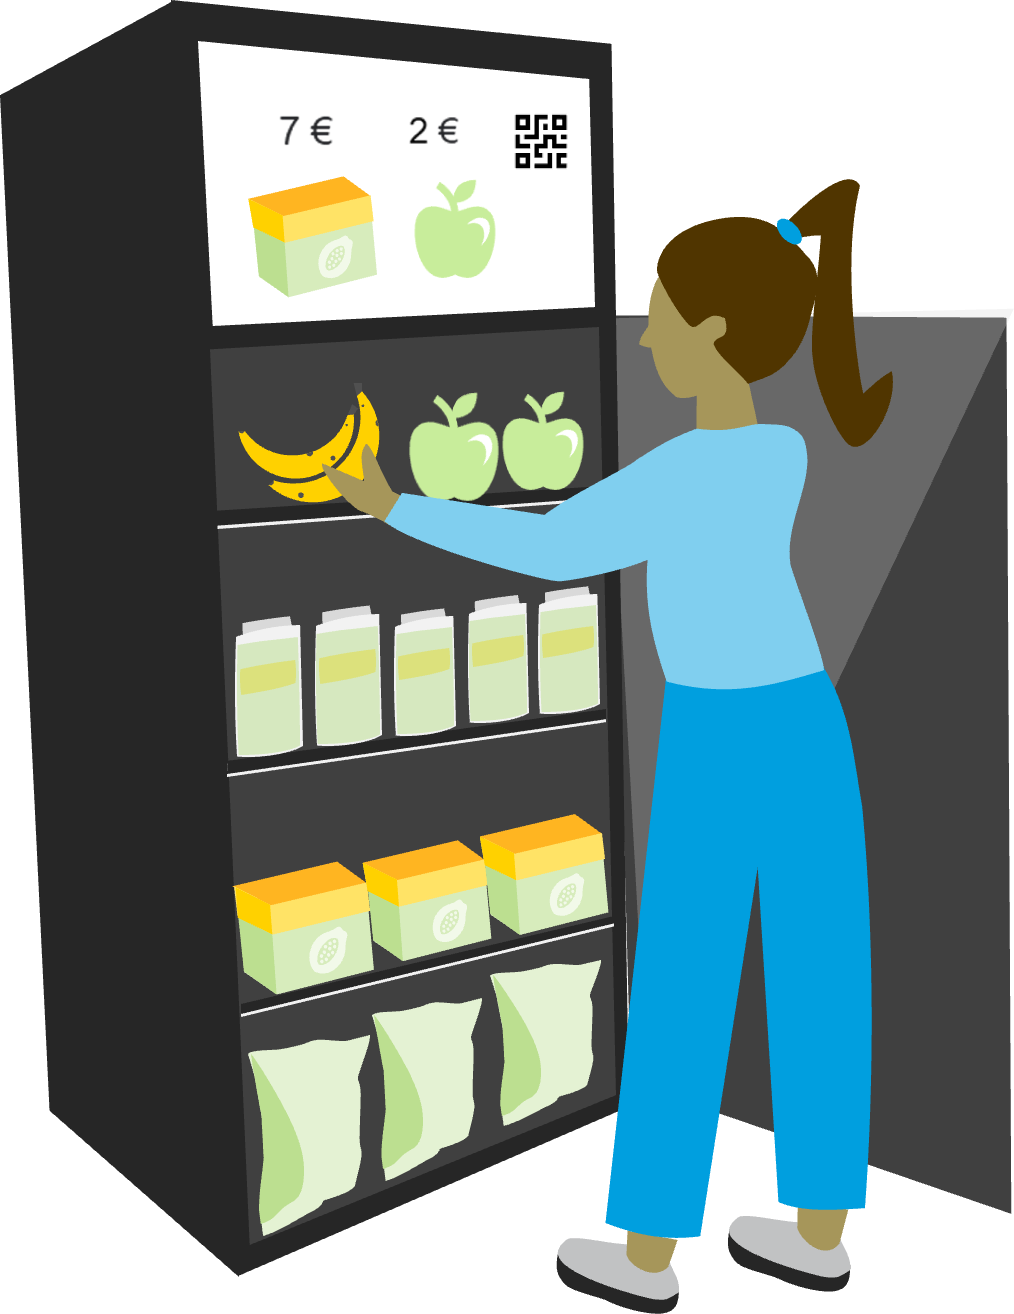 Consumer buying from a smart vending machine